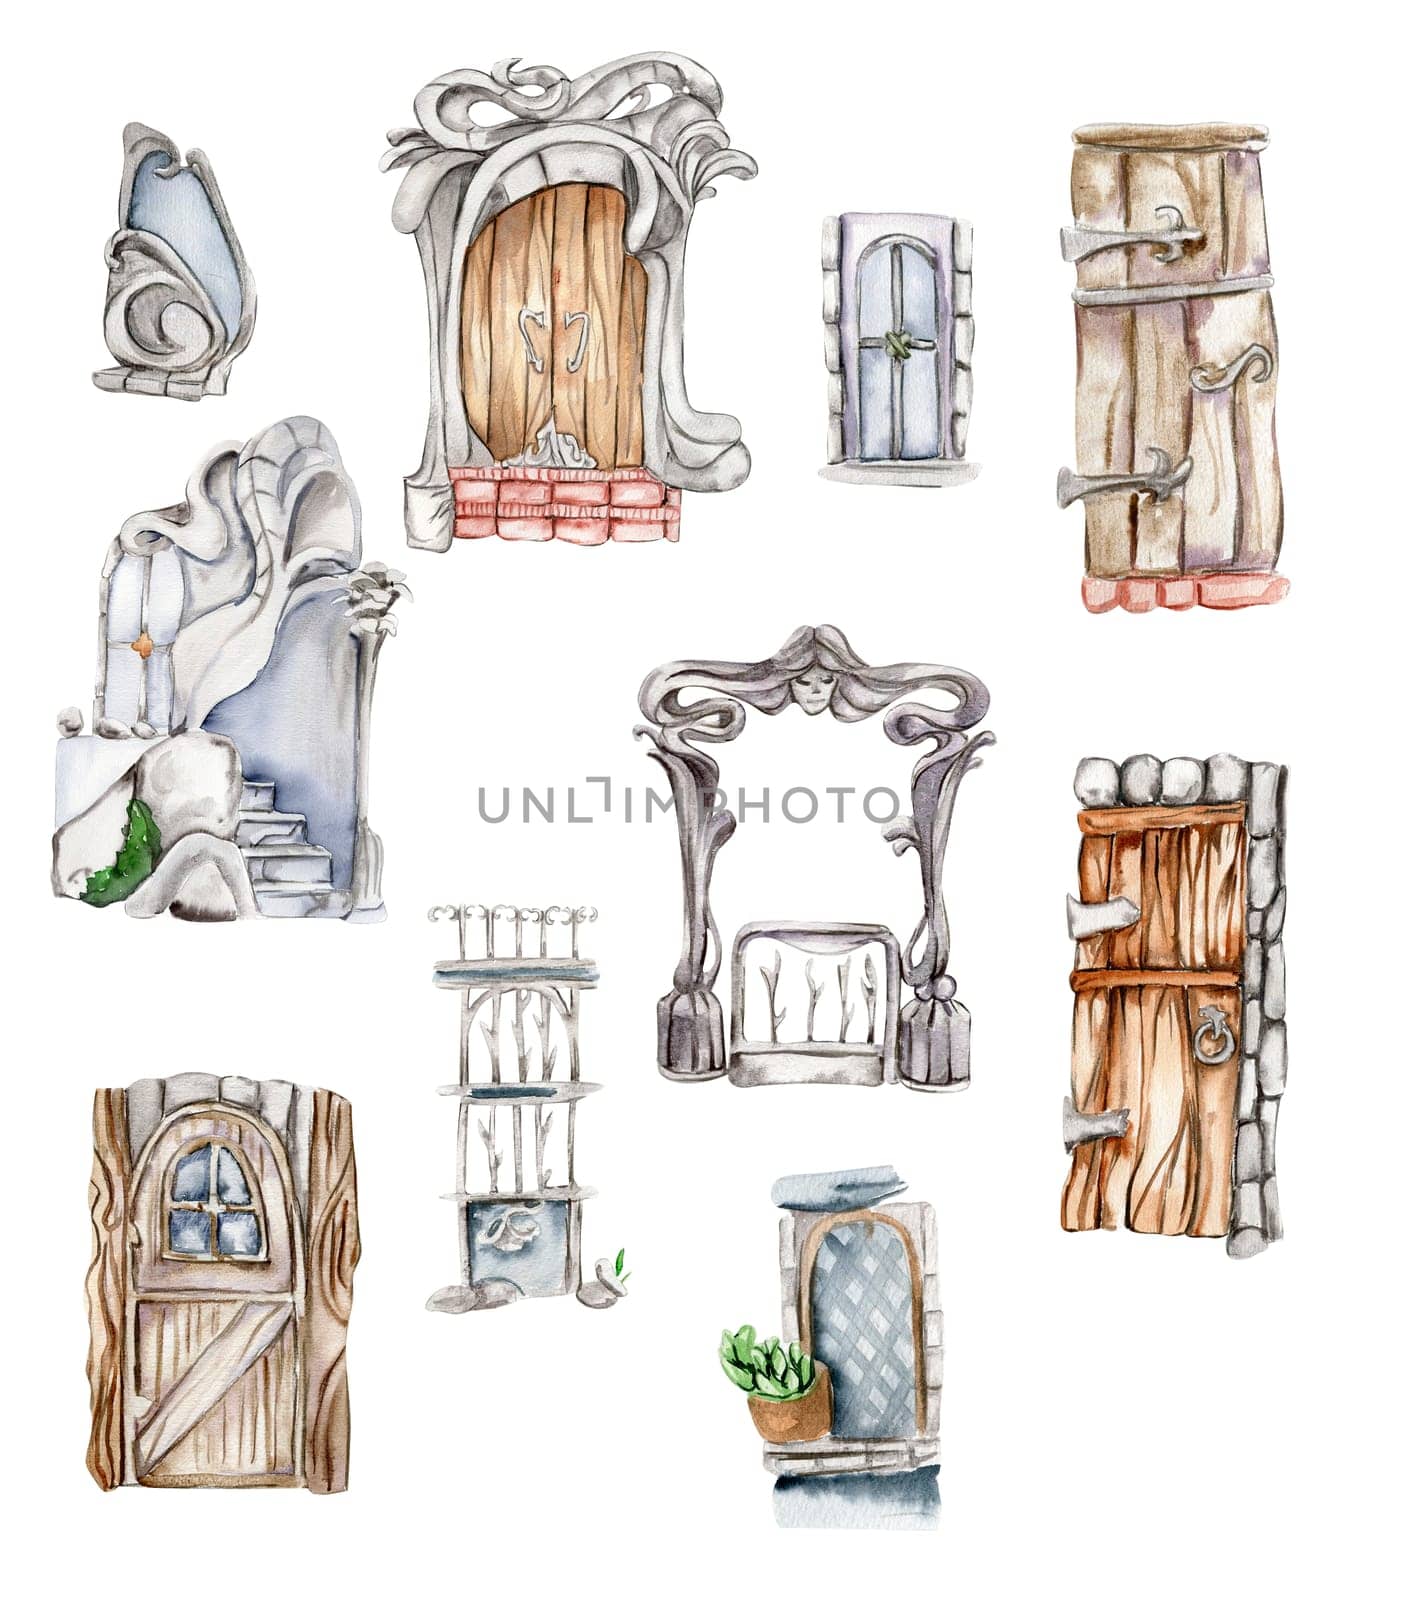 Wooden door, window and iron gate for fairy. Hand painted fairy tale illustration for greeting cards, prints, post cards and souvenirs. Illustartion isilated on white background.